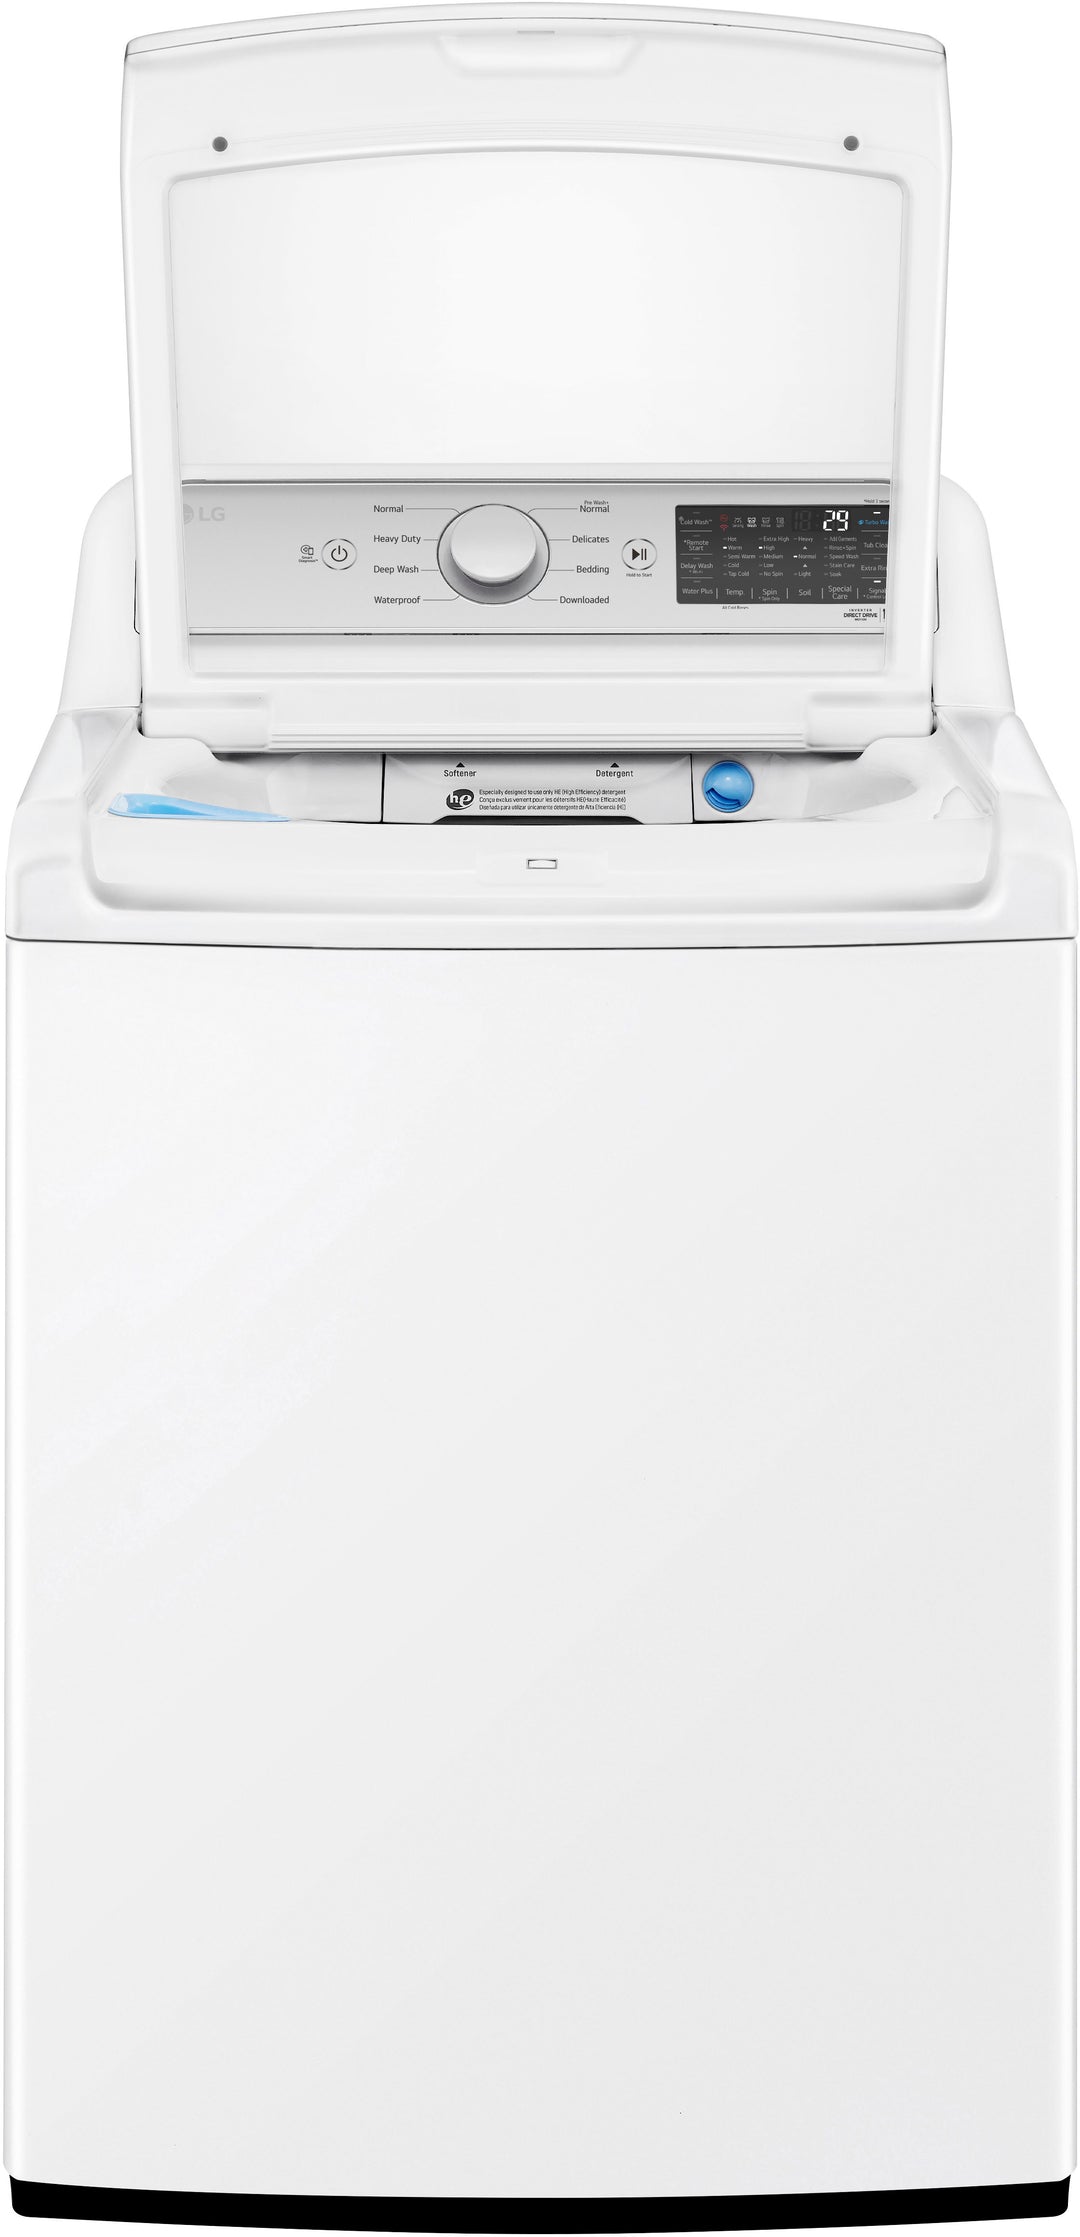 LG - 5.5 Cu. Ft. Smart Top Load Washer with TurboWash3D - White_9